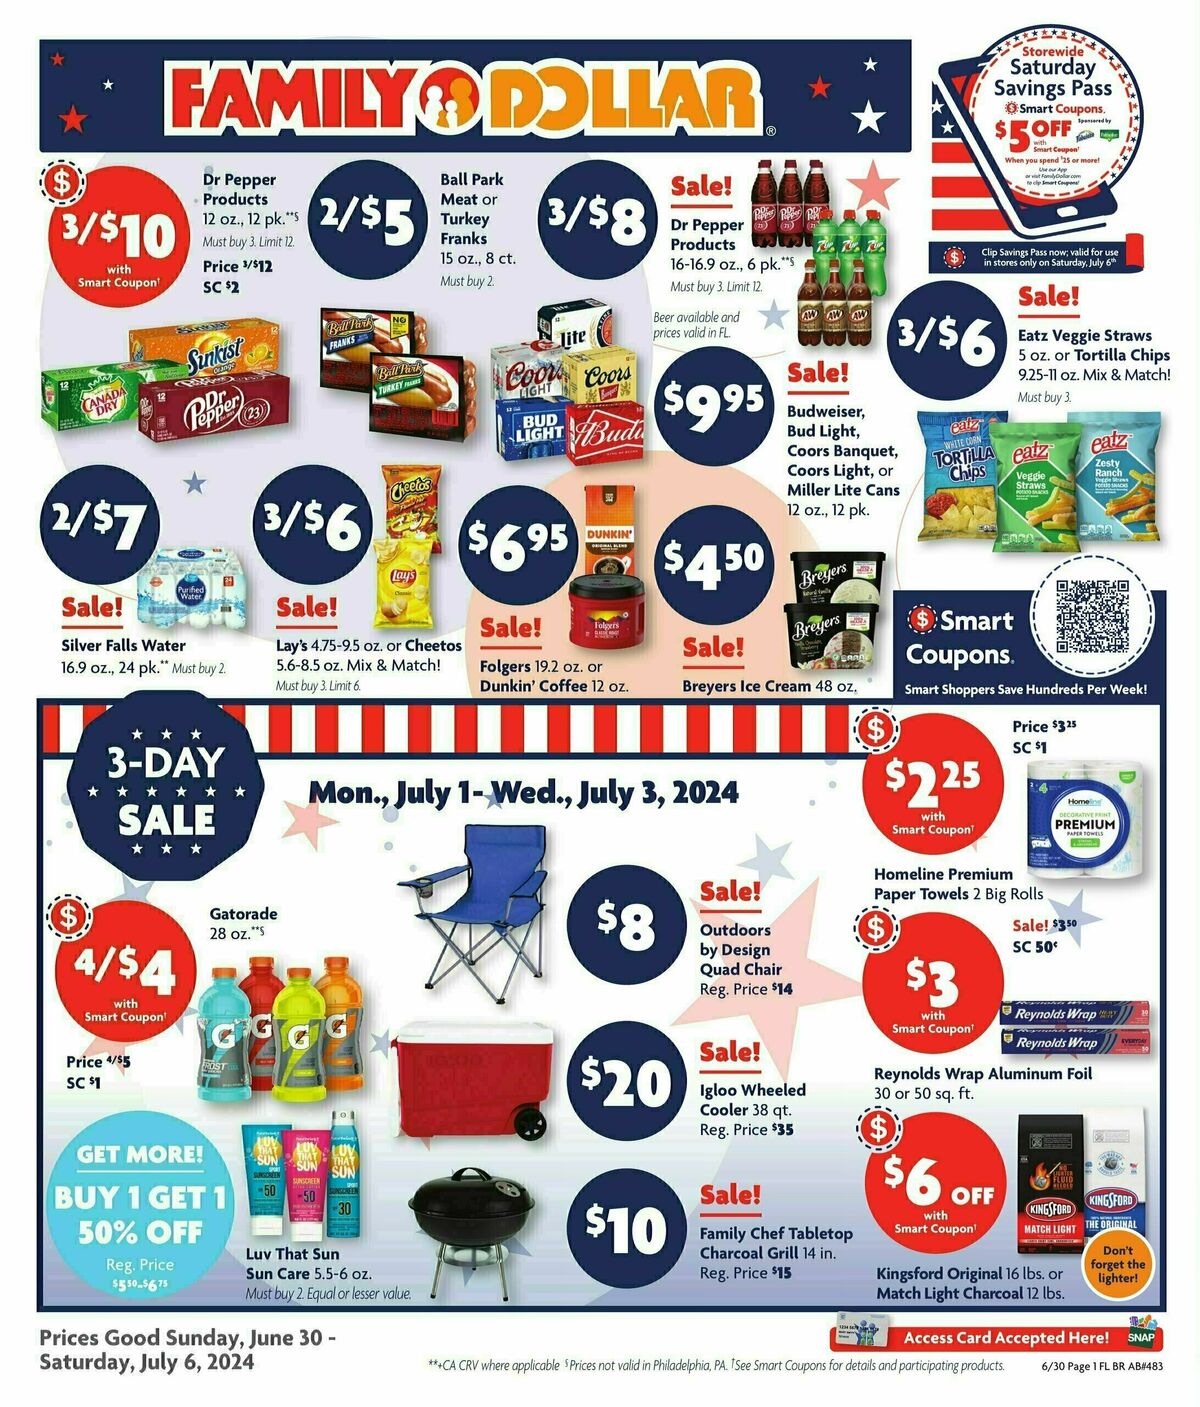 Family Dollar Weekly Ad from June 30